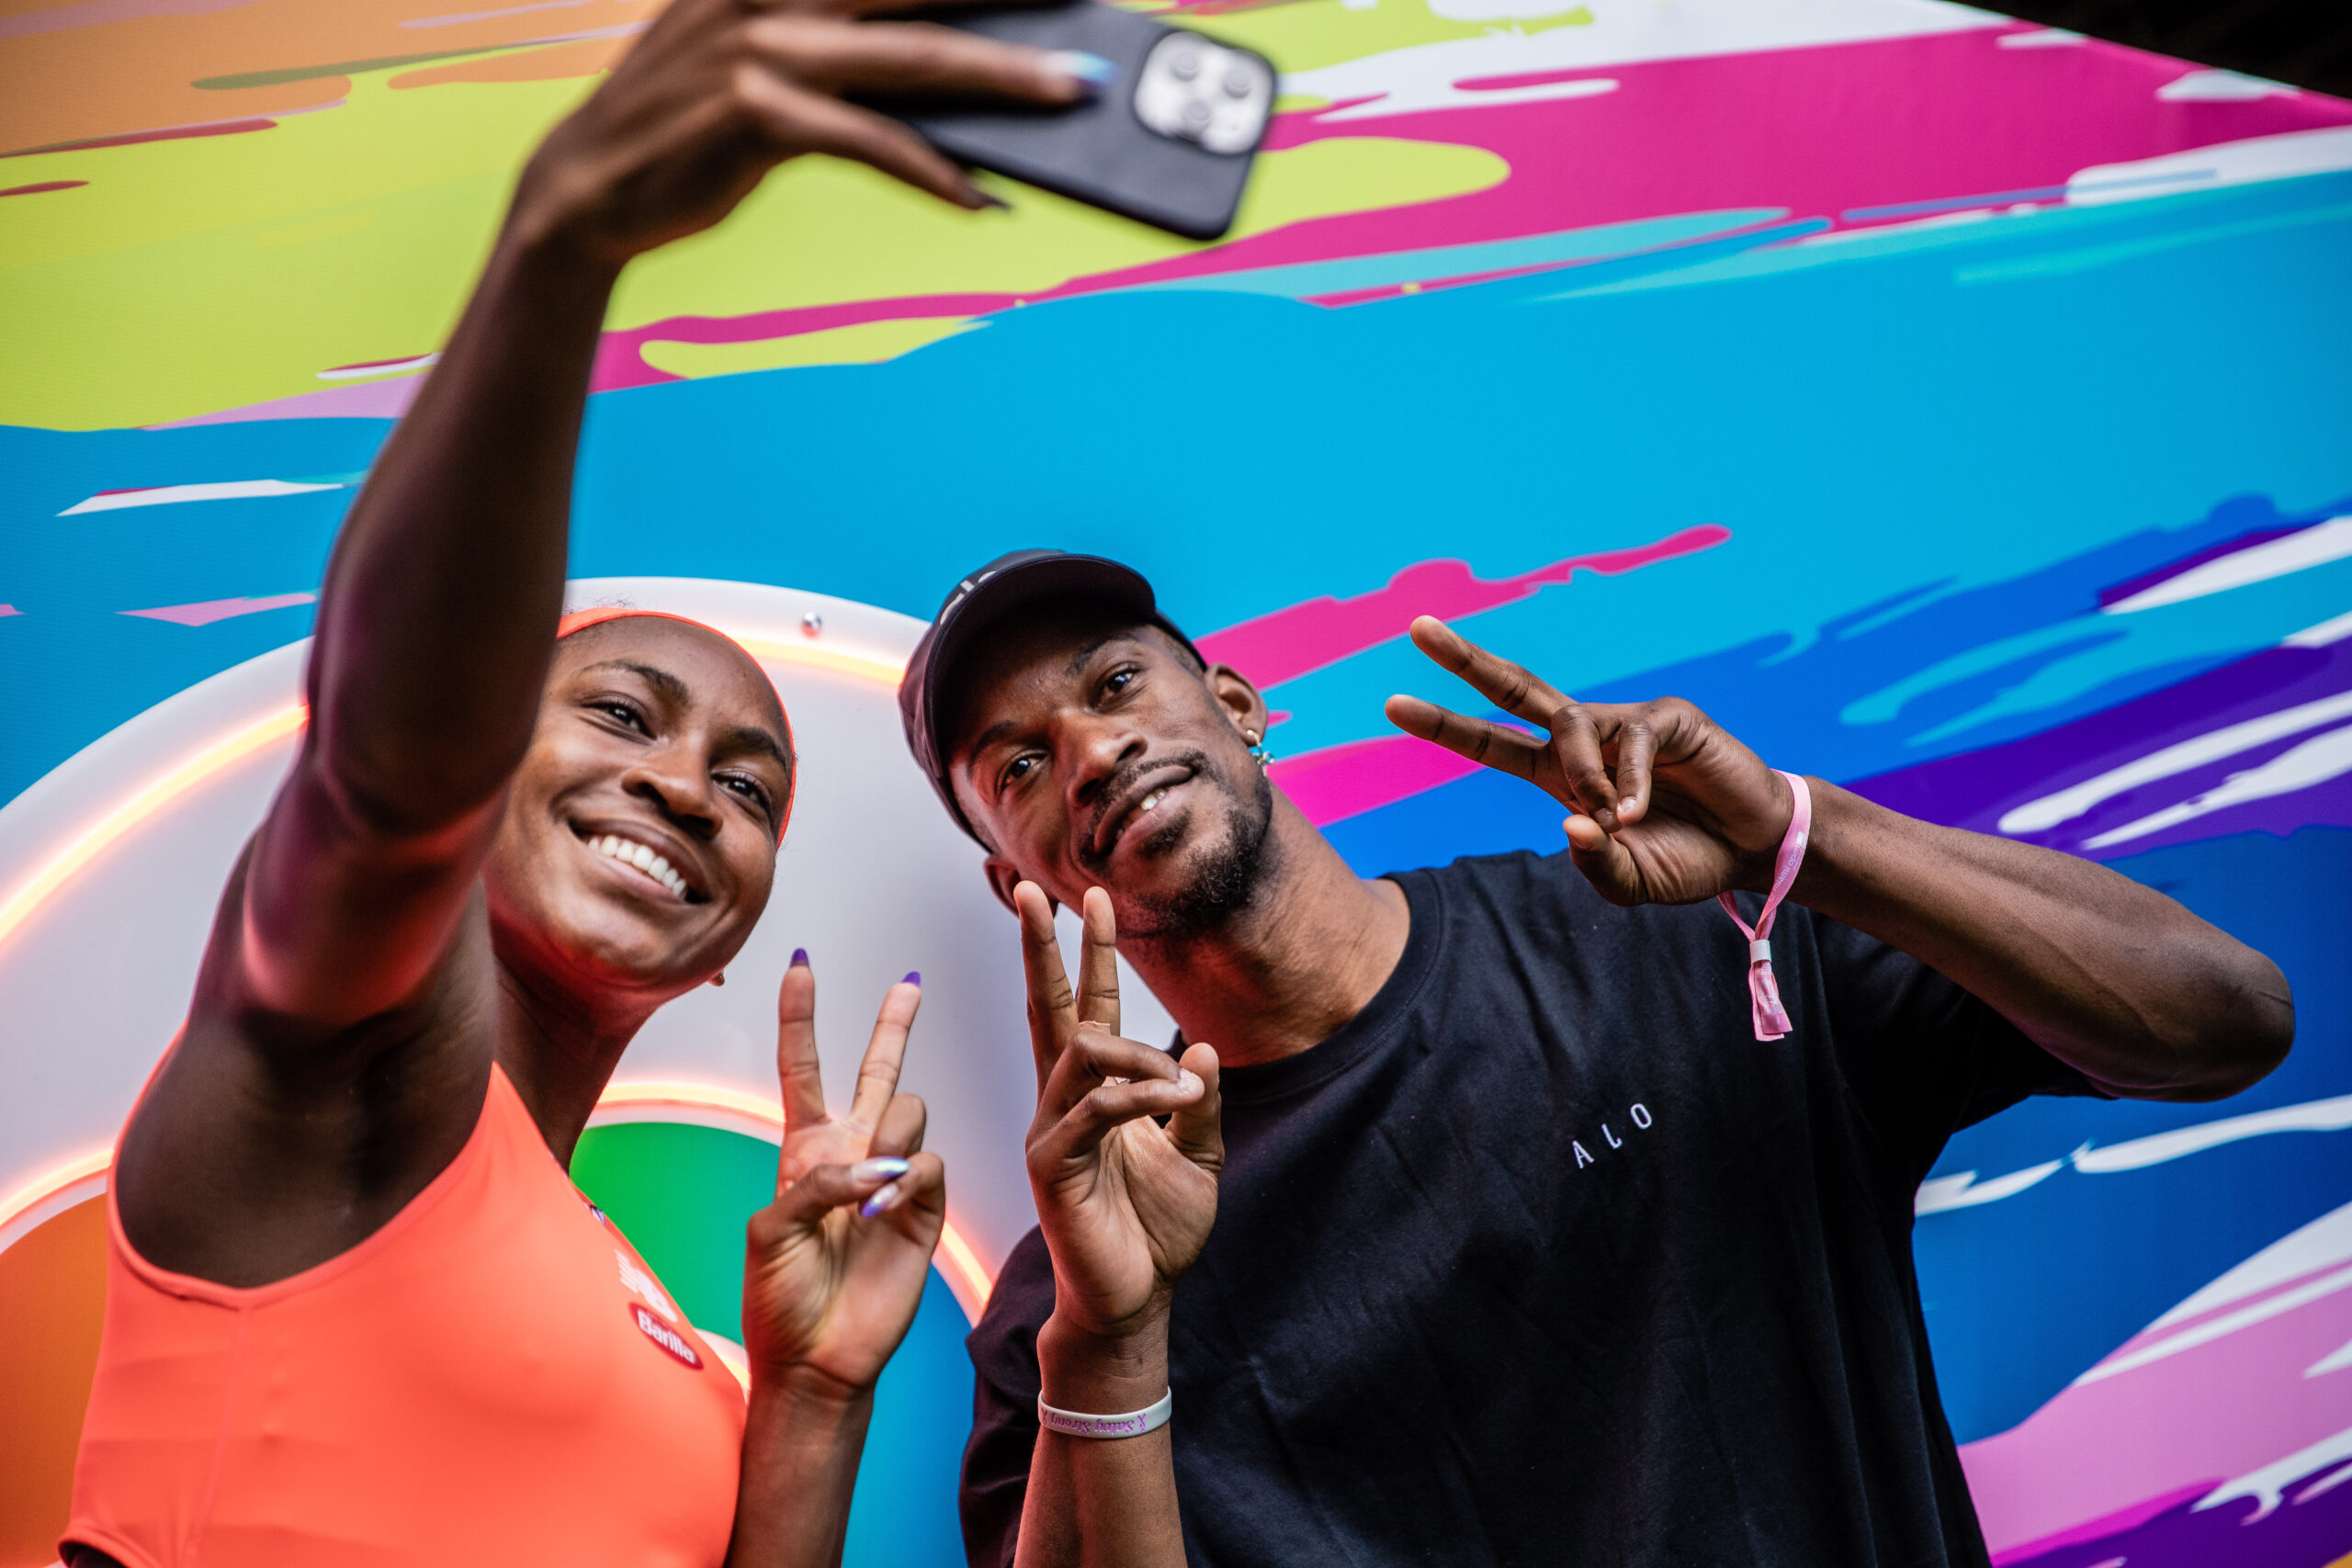 Coco Gauff takes a selfie with Miami Heat player Jimmy Butler during the 2023 Miami Open in Miami Gardens, Fla.